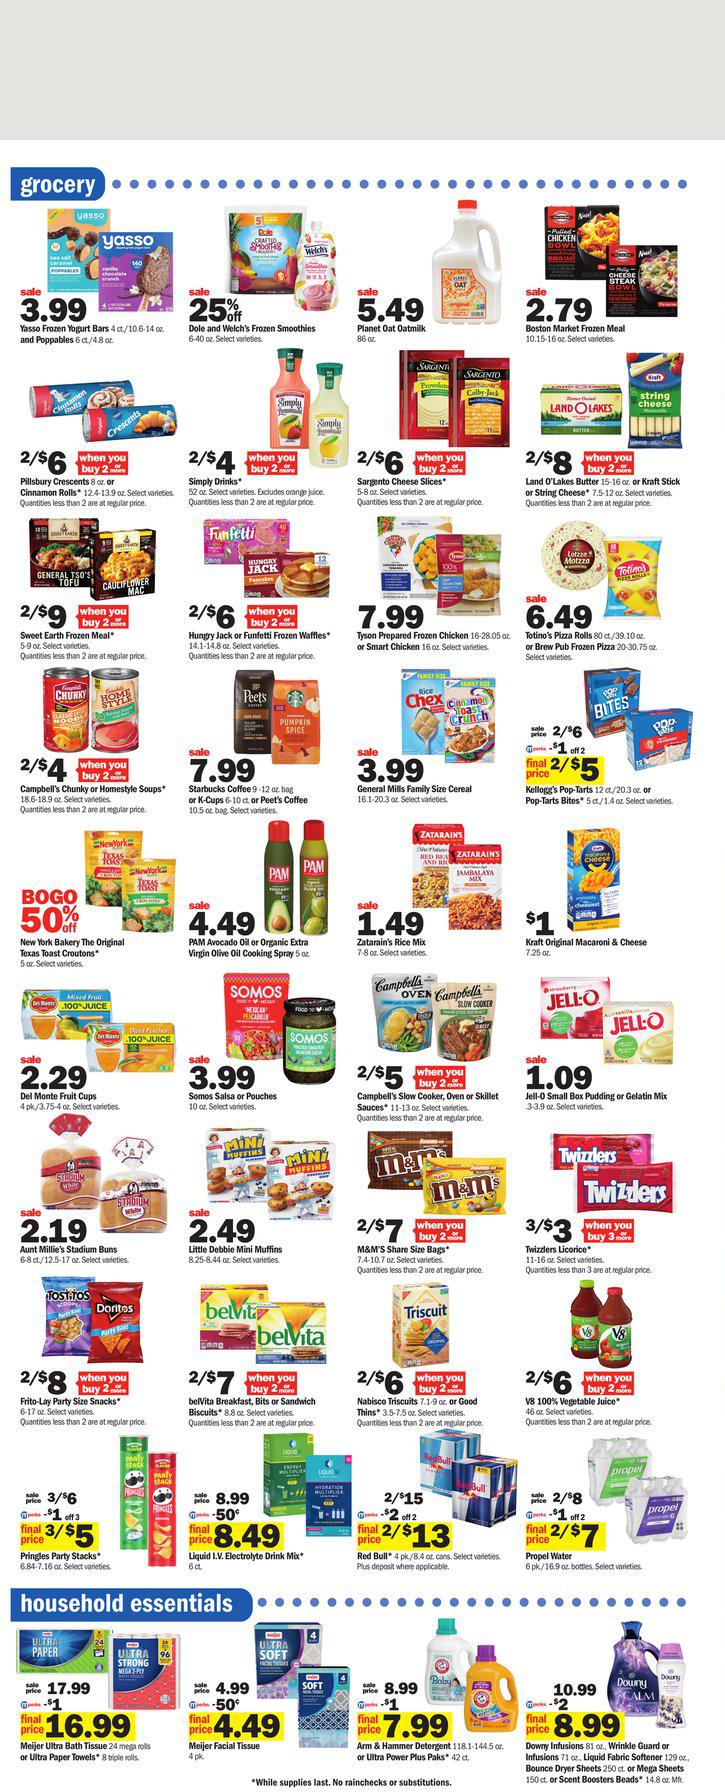 25.09.2022 Meijer ad 5. page